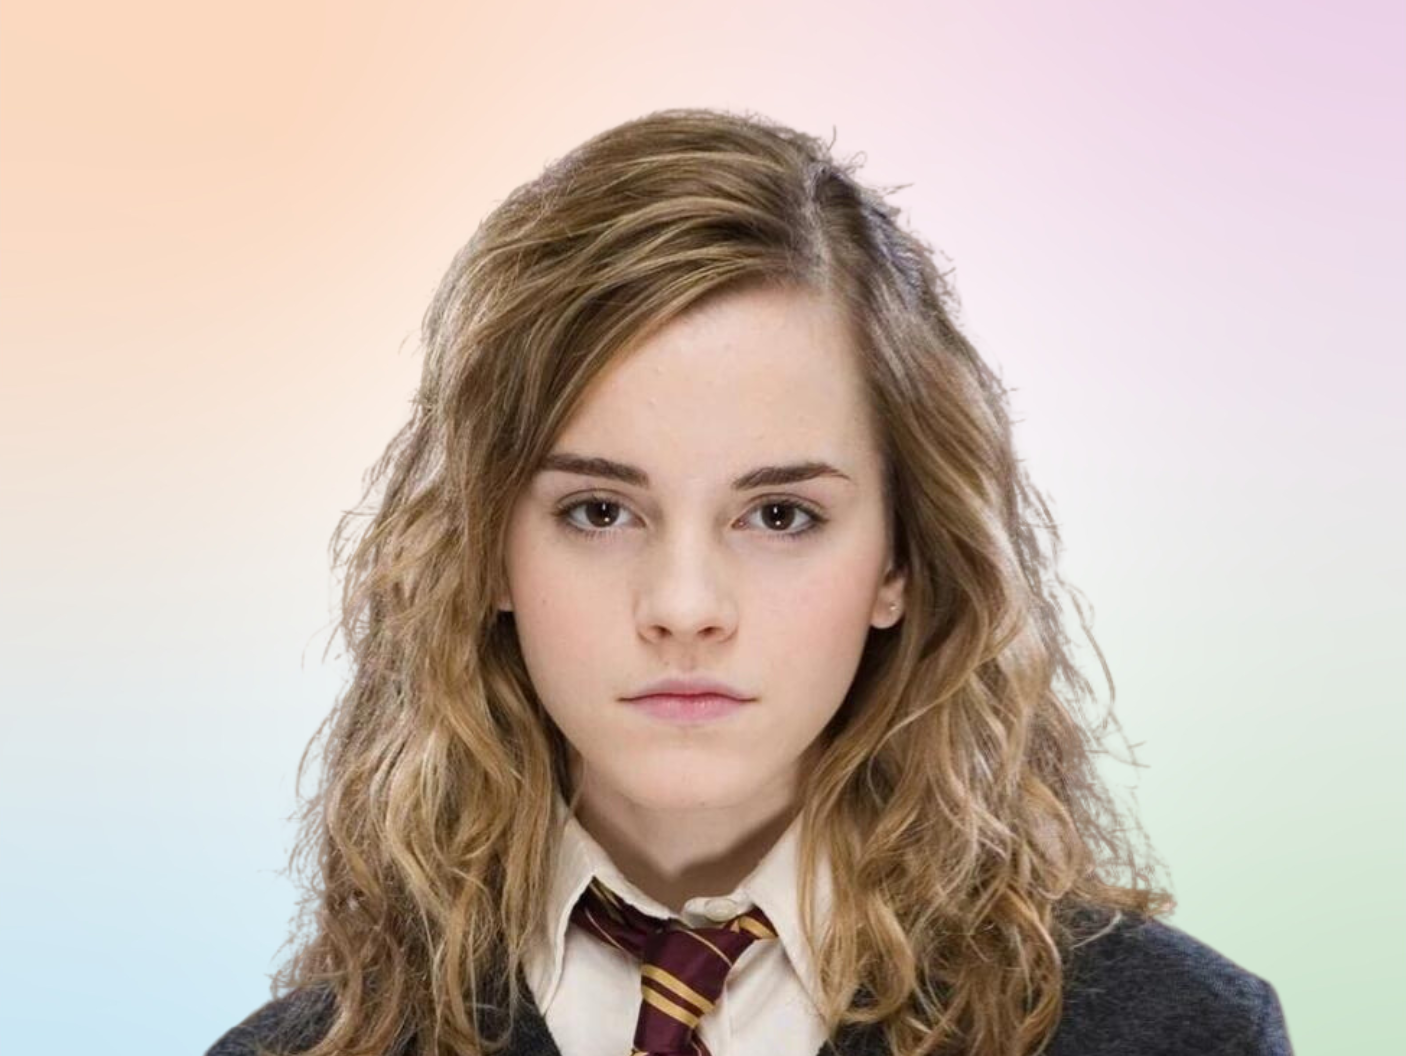 The importance of Hermione Granger